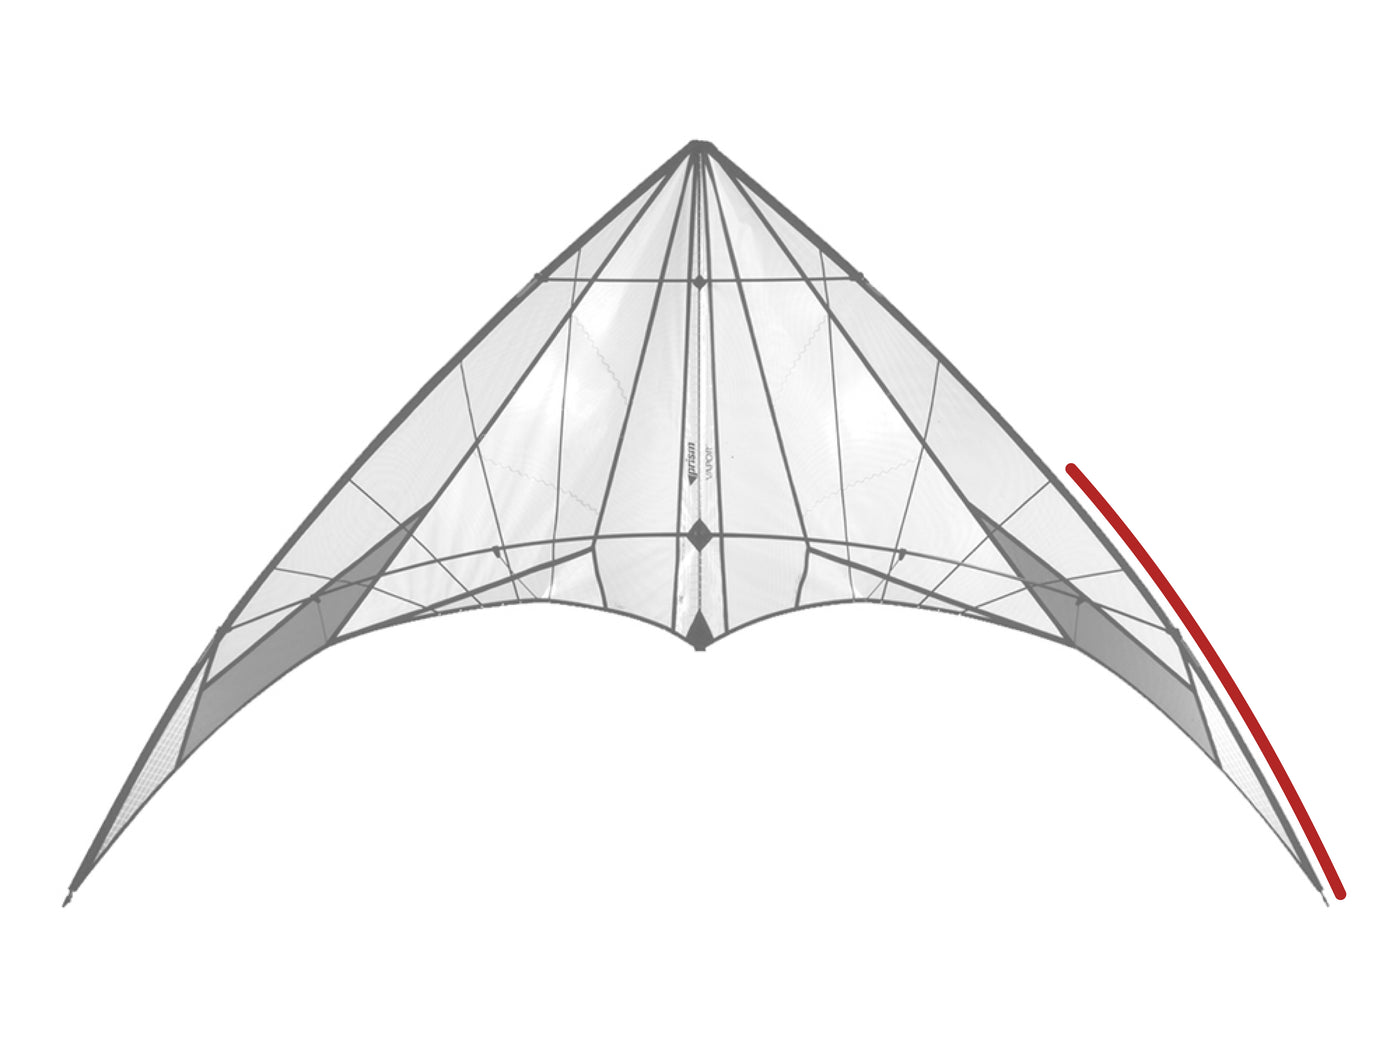 Diagram showing location of the Vapor Lower Leading Edge on the kite.